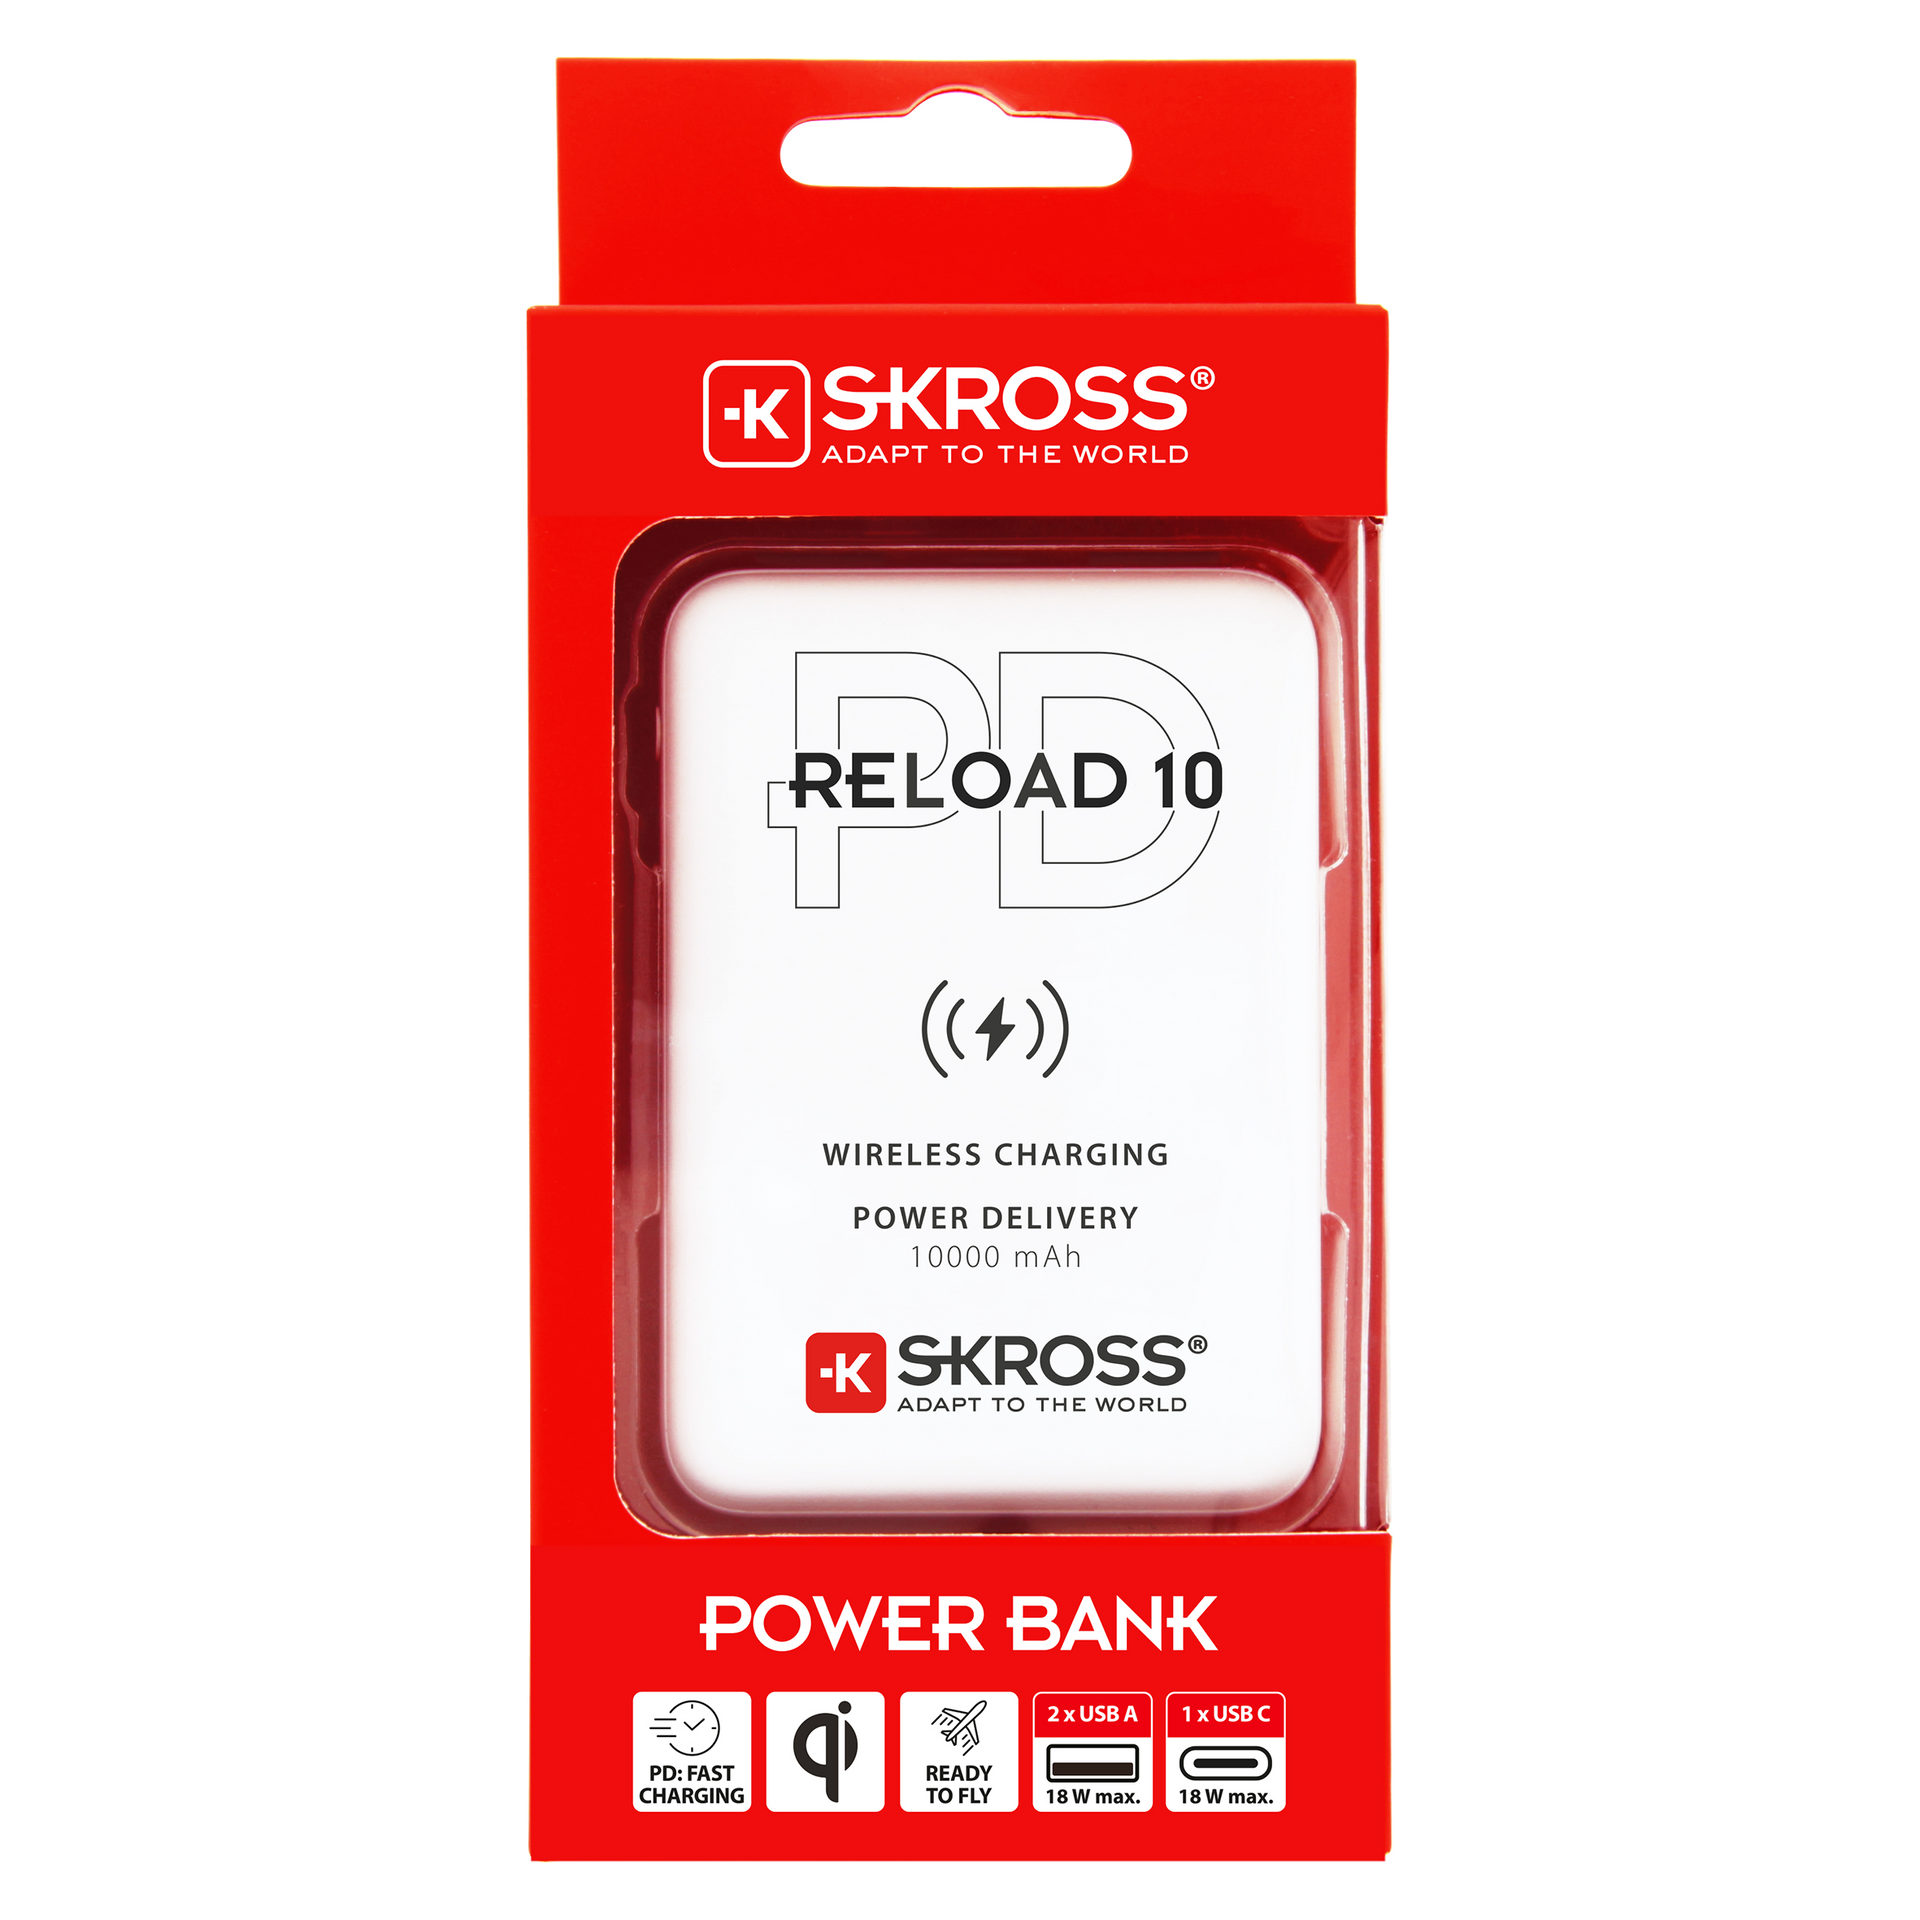 Skross 10,000 mAh Power Bank with Wireless Charging. Skross Reload 10 Qi PD Packaging